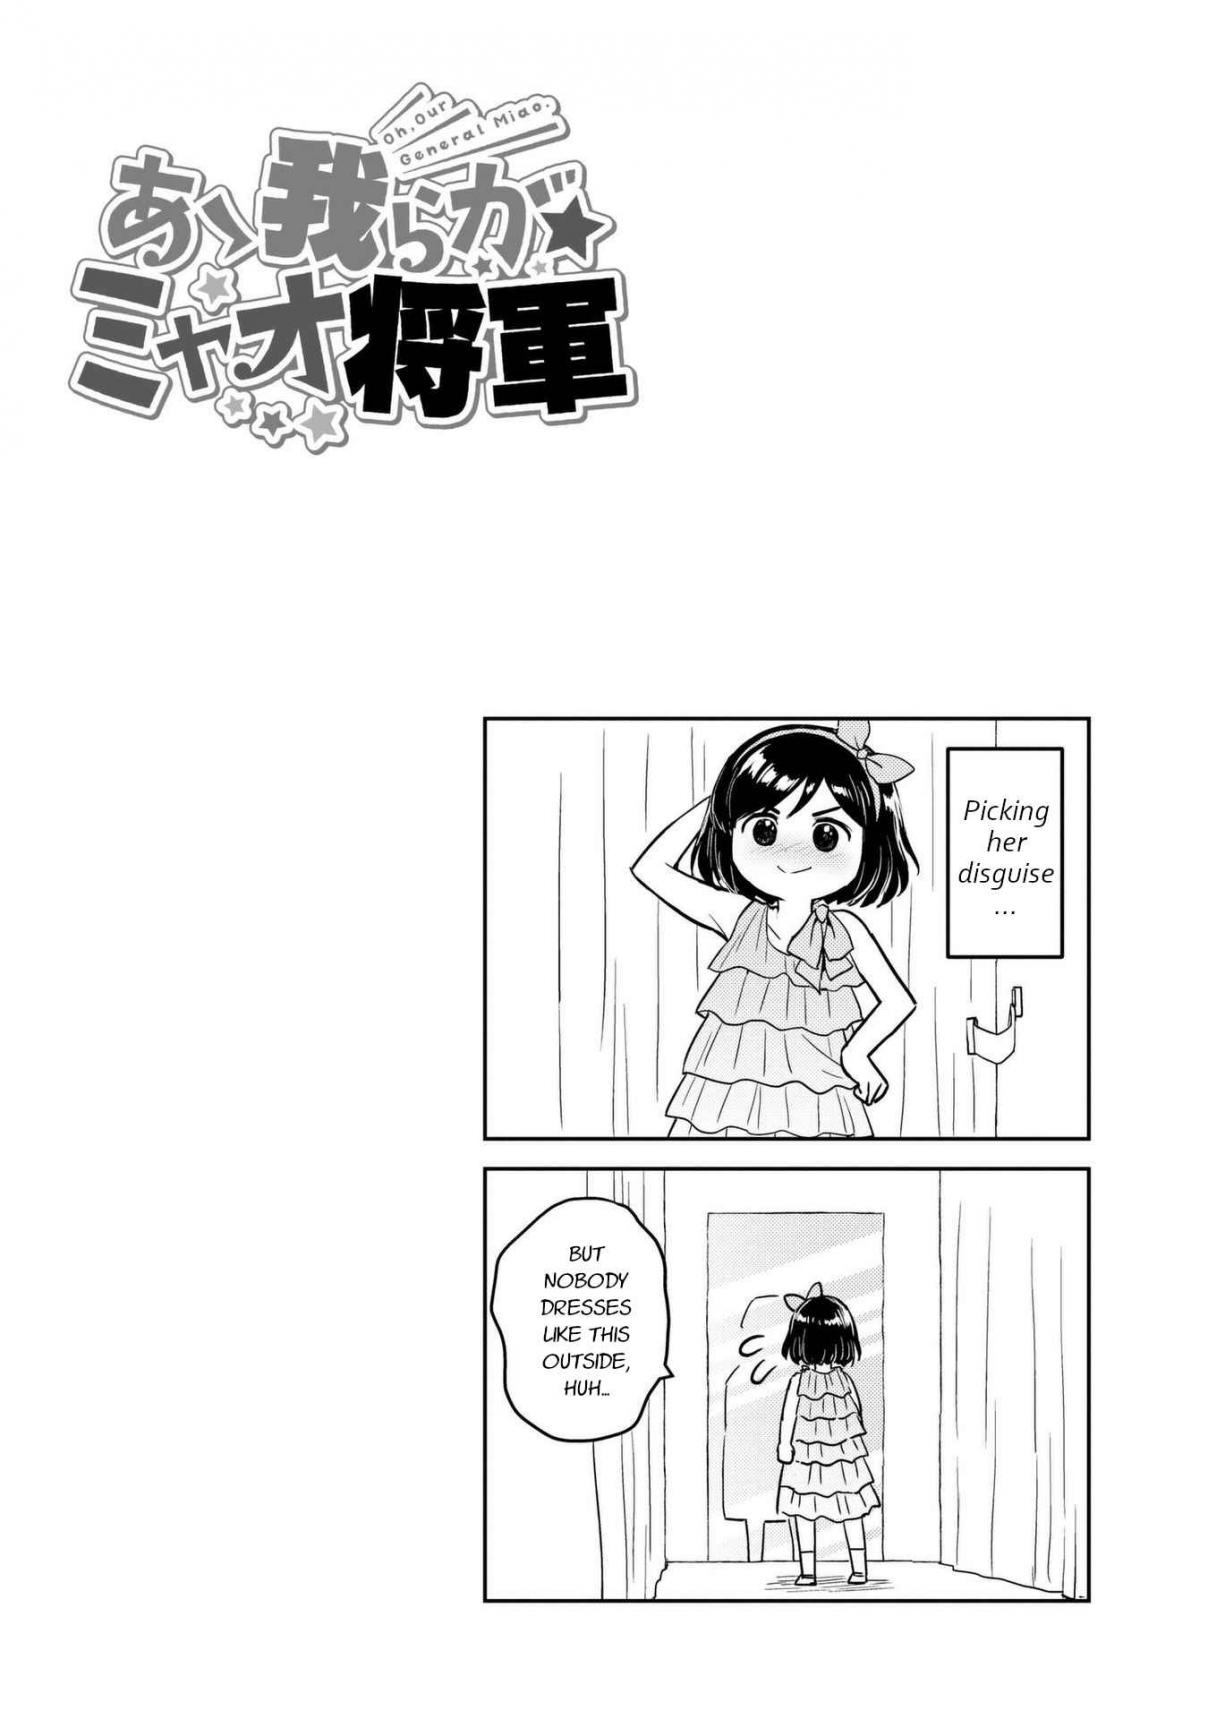 Oh, Our General Myao Vol. 1 Ch. 11 In Which Myao Sneaks Into the City, Part 1